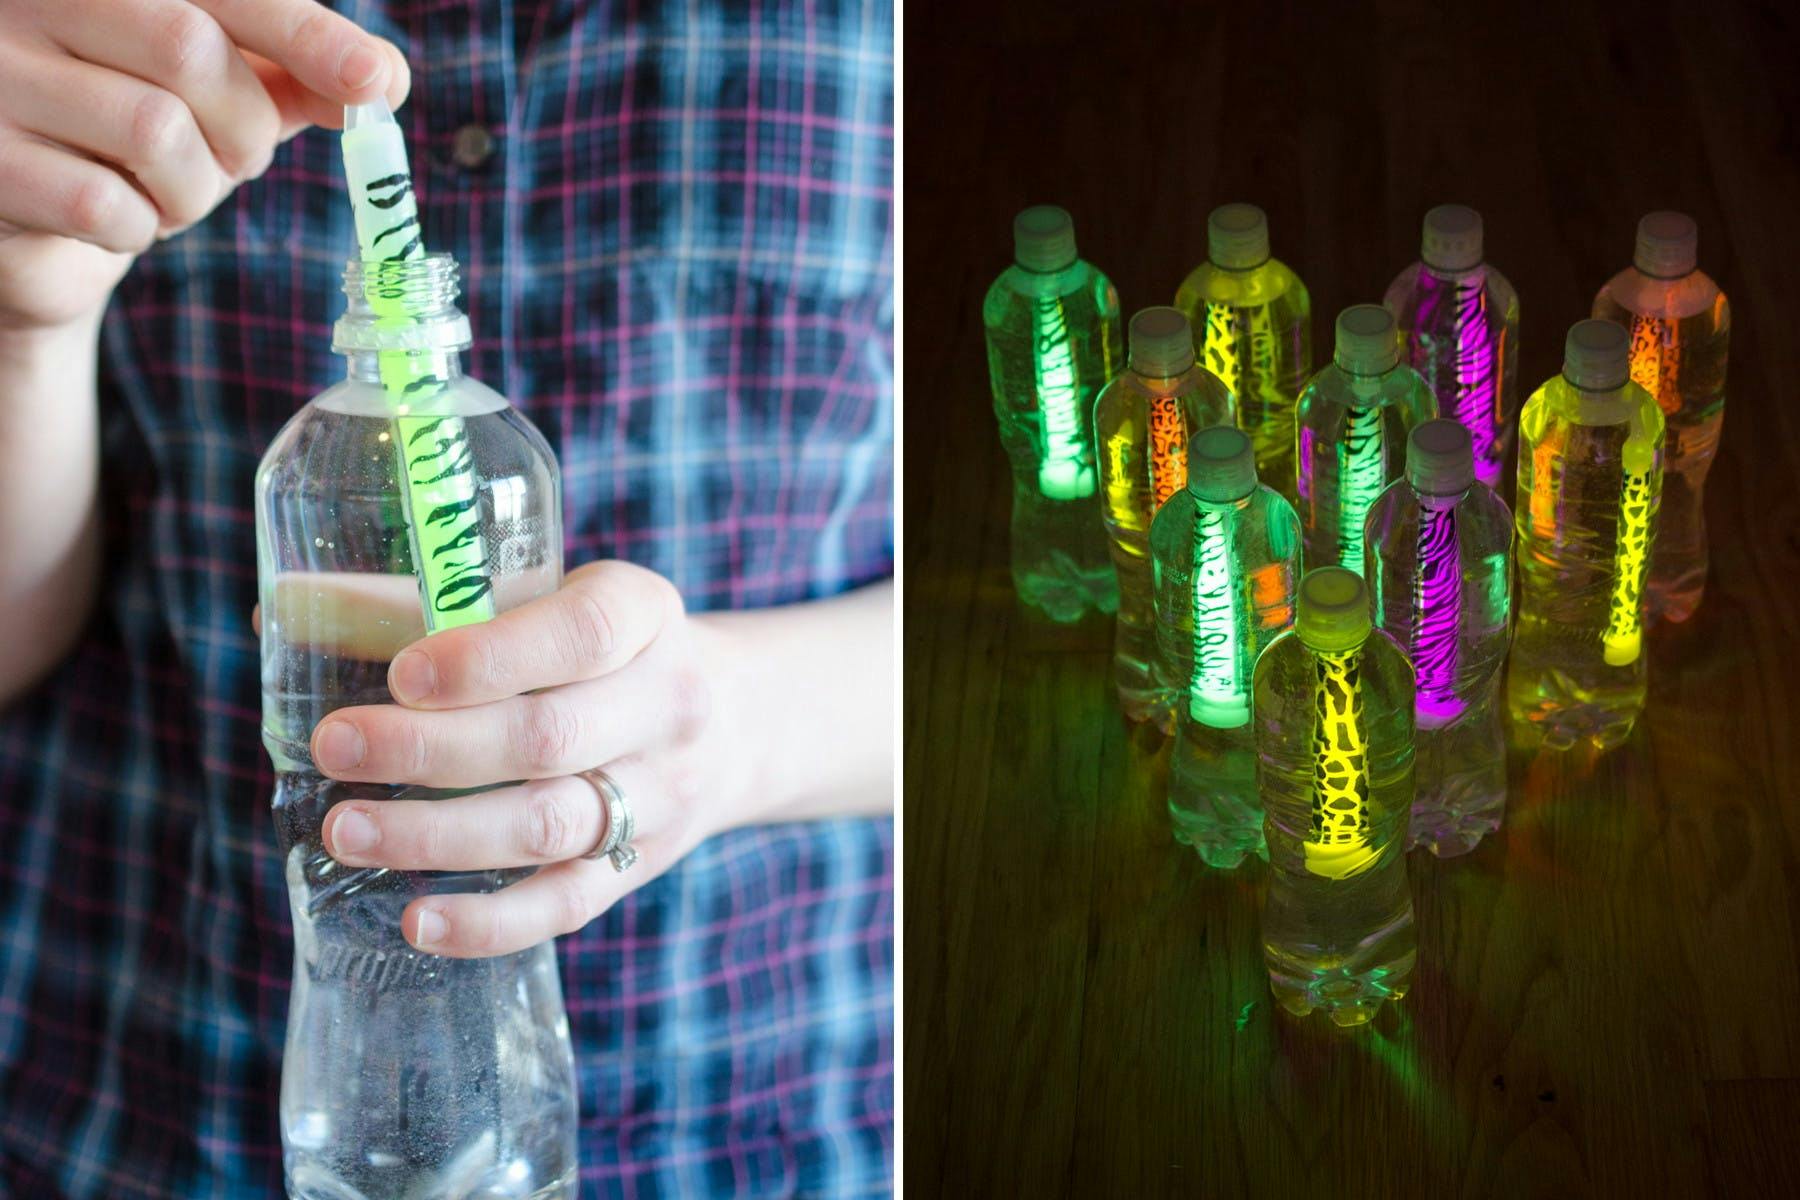 Someone sticking a glow stick into a water bottle, and 10 completed glowing bottles lined up in a dark hallway as diy bowling pins